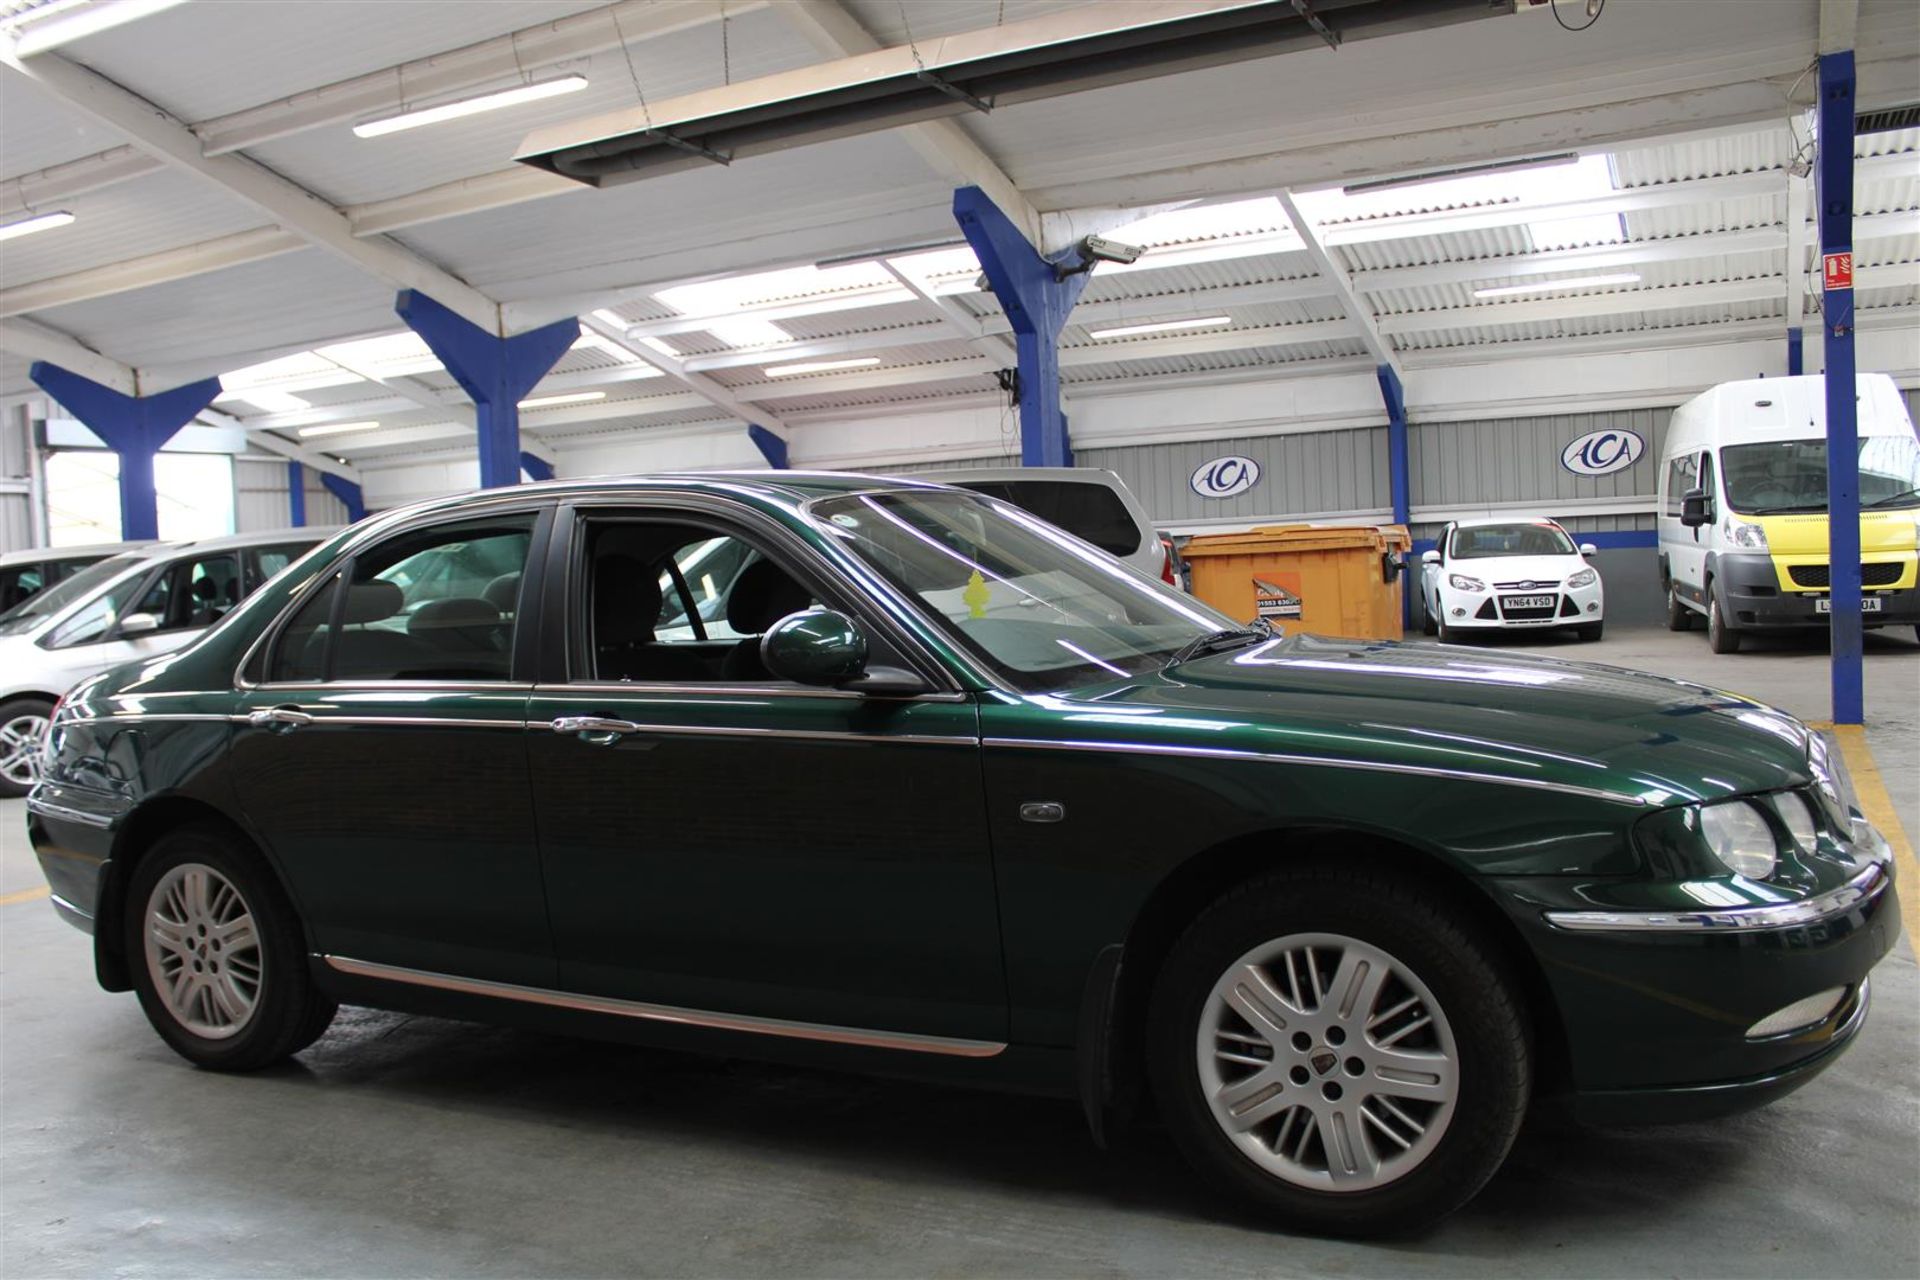 52 03 Rover 75 Club - Image 27 of 35